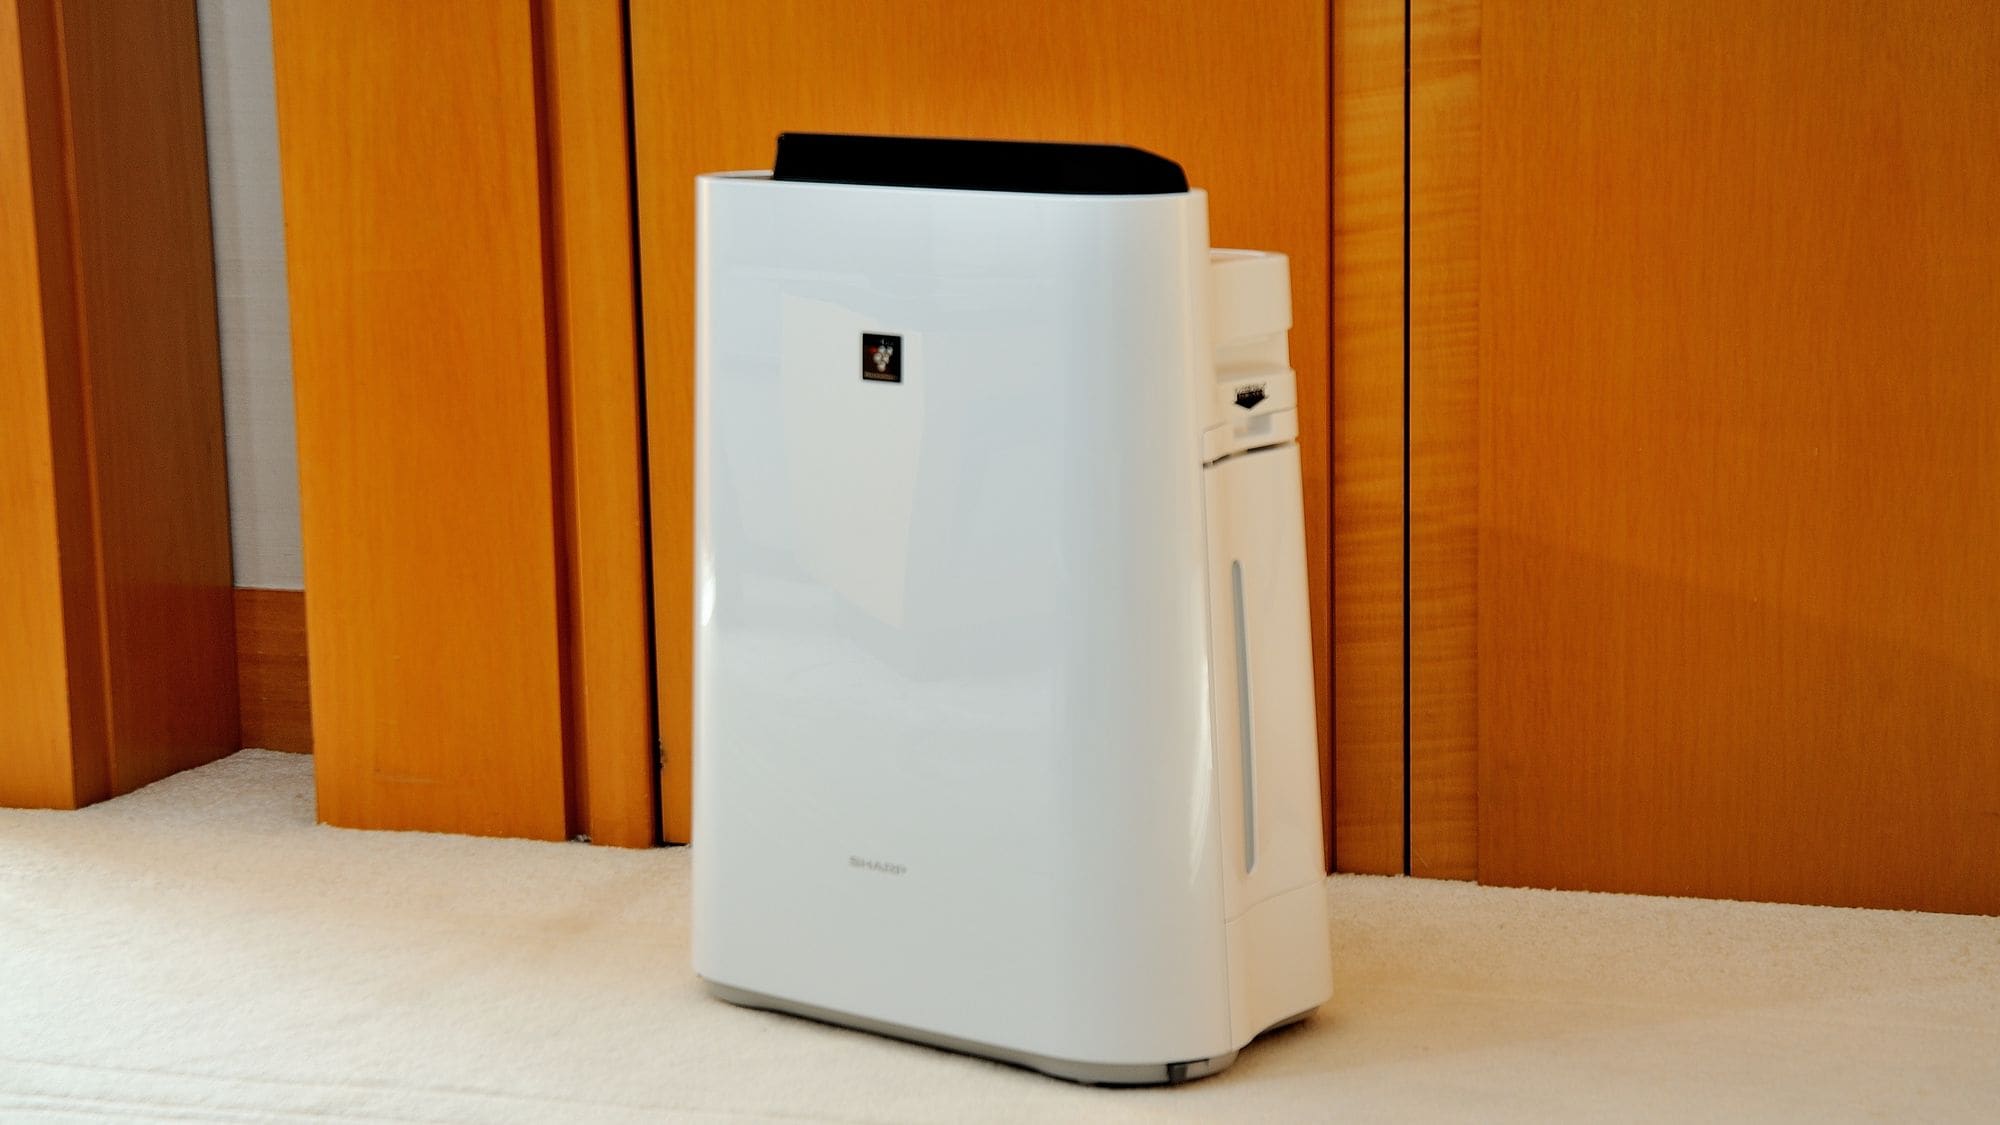 Humidified air purifiers are installed in all rooms on the 7th floor